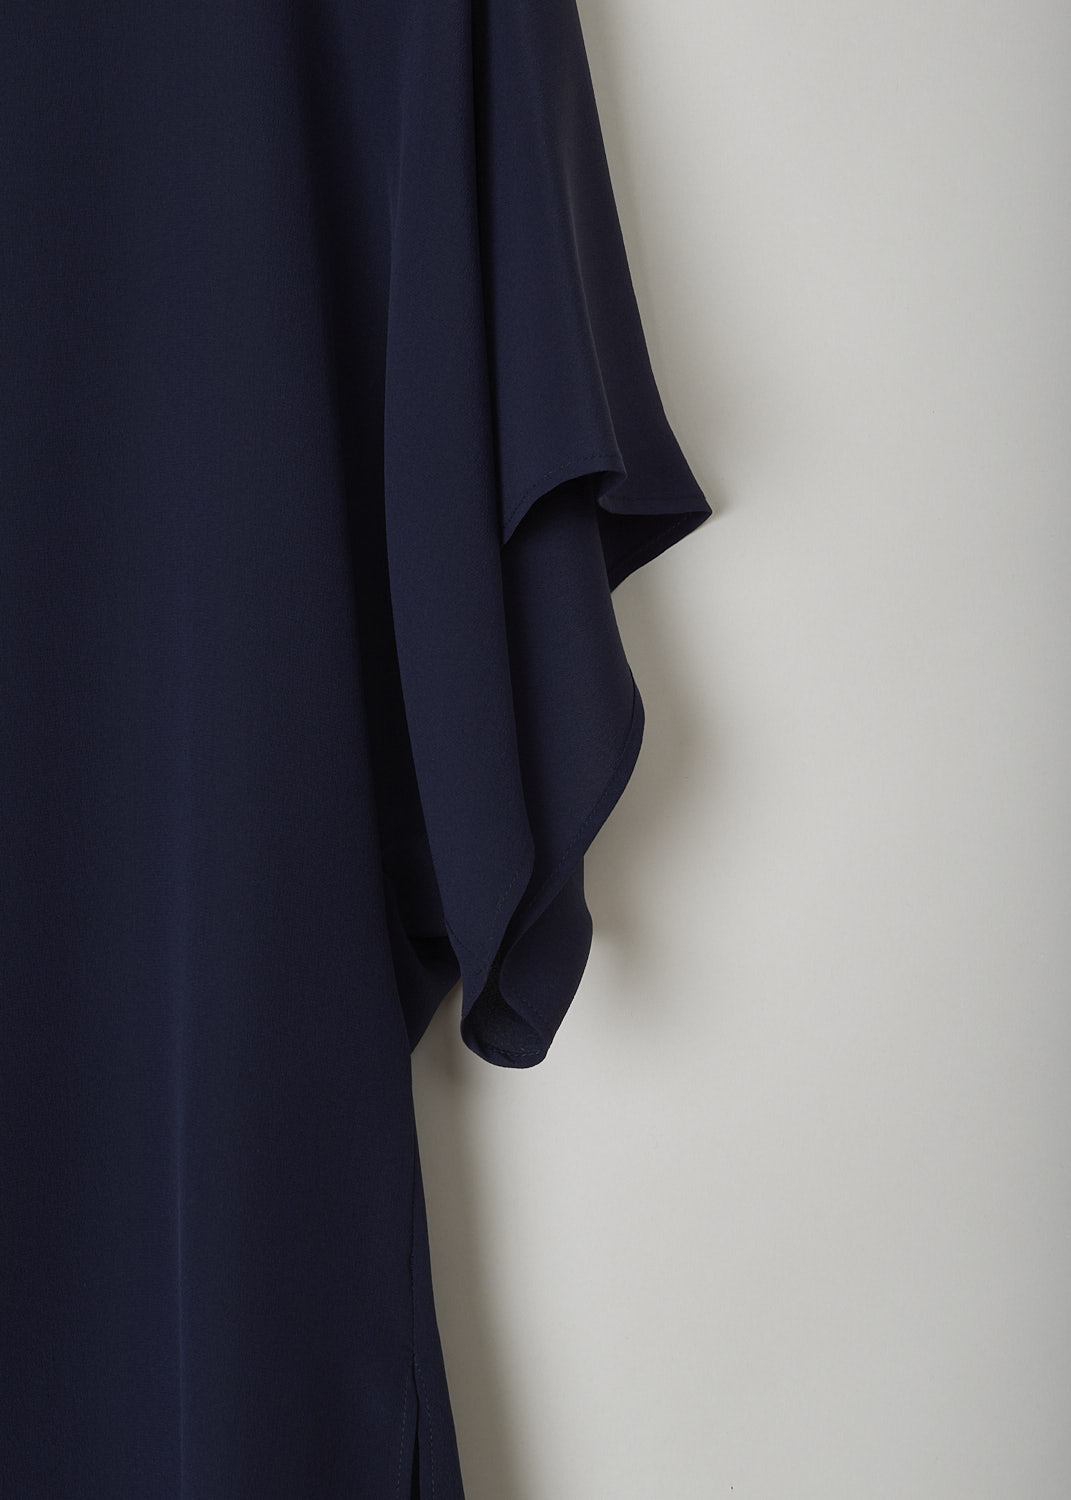 CHLOÃ‰, INK NAVY SILK TOP, CHC22UHT120044C3, Blue, Detail, This ink navy blue silk top has a boat neckline and loose short cap sleeves. The top has side slits and a straight hemline. 
